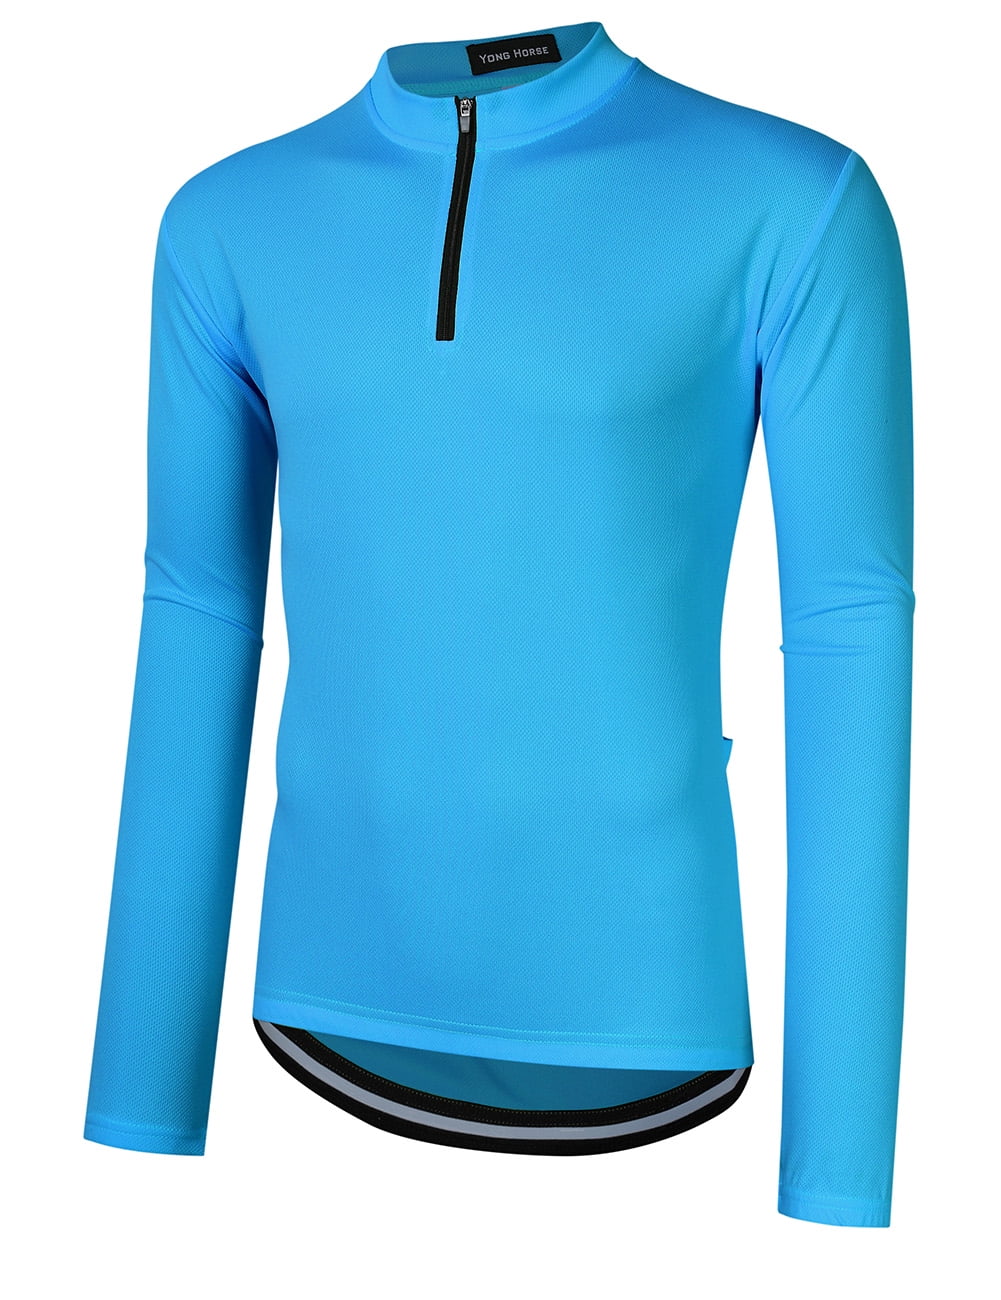 Details about   Men's Cycling Clothing Bicycle Jersey Sportswear Long Sleeve Fishing Shirt SALE 